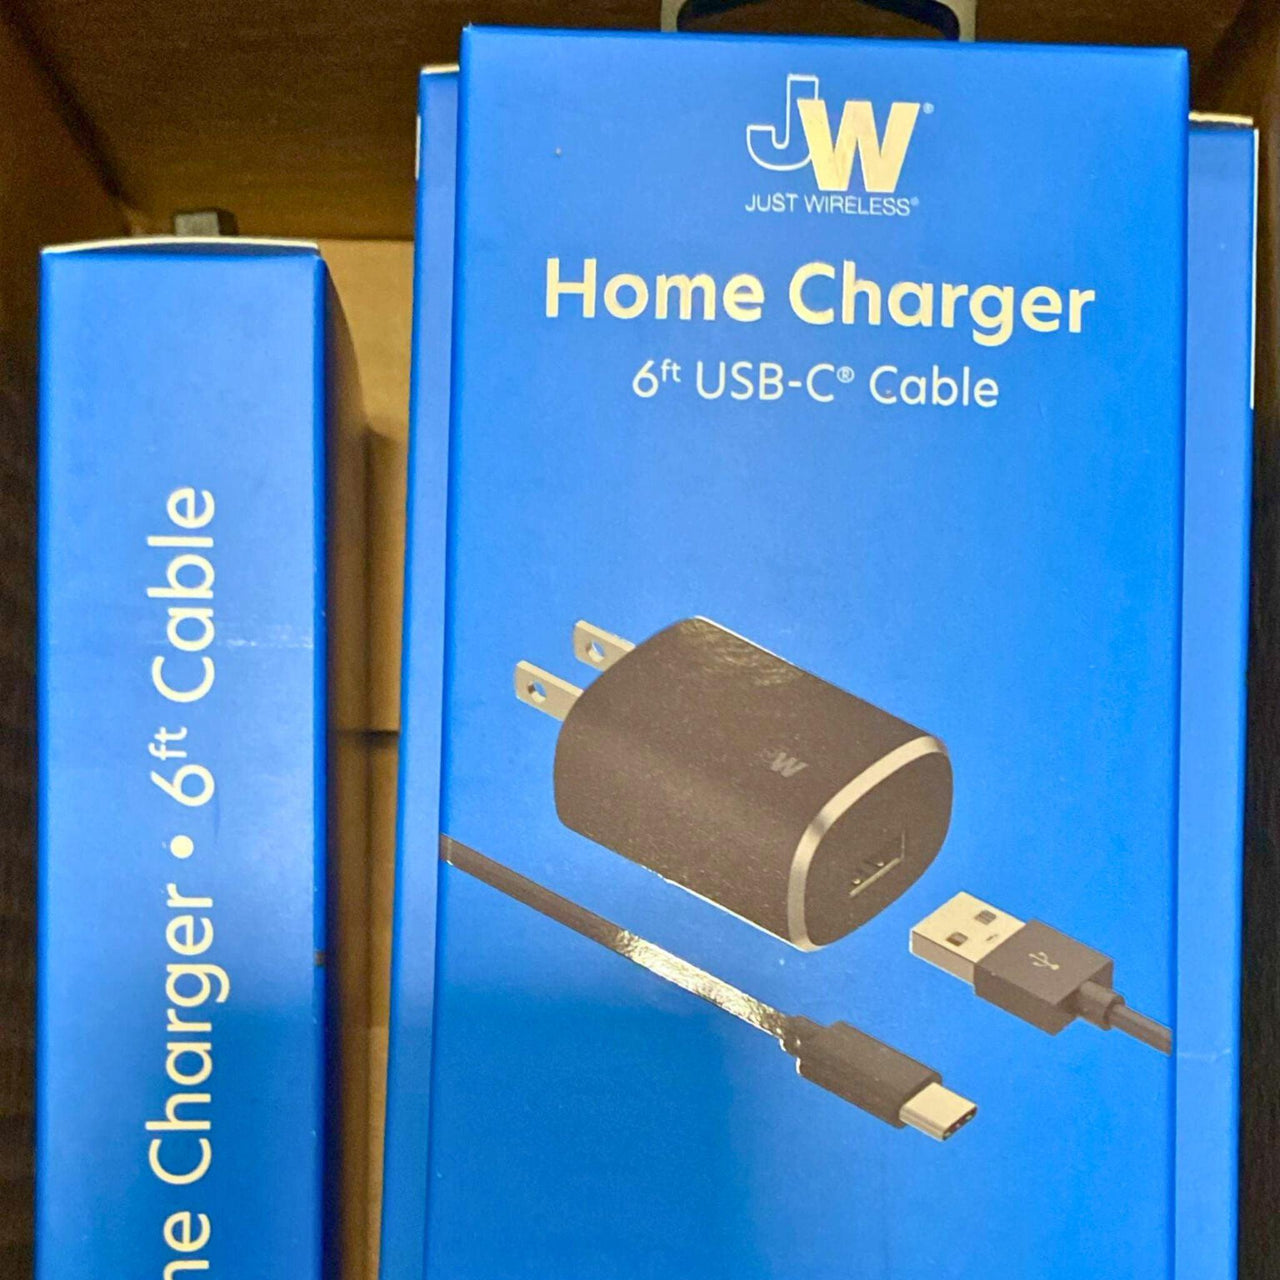 Home Charger 6ft USB-C Cable for Apple & Android (42 Pcs Lot) - Discount Wholesalers Inc